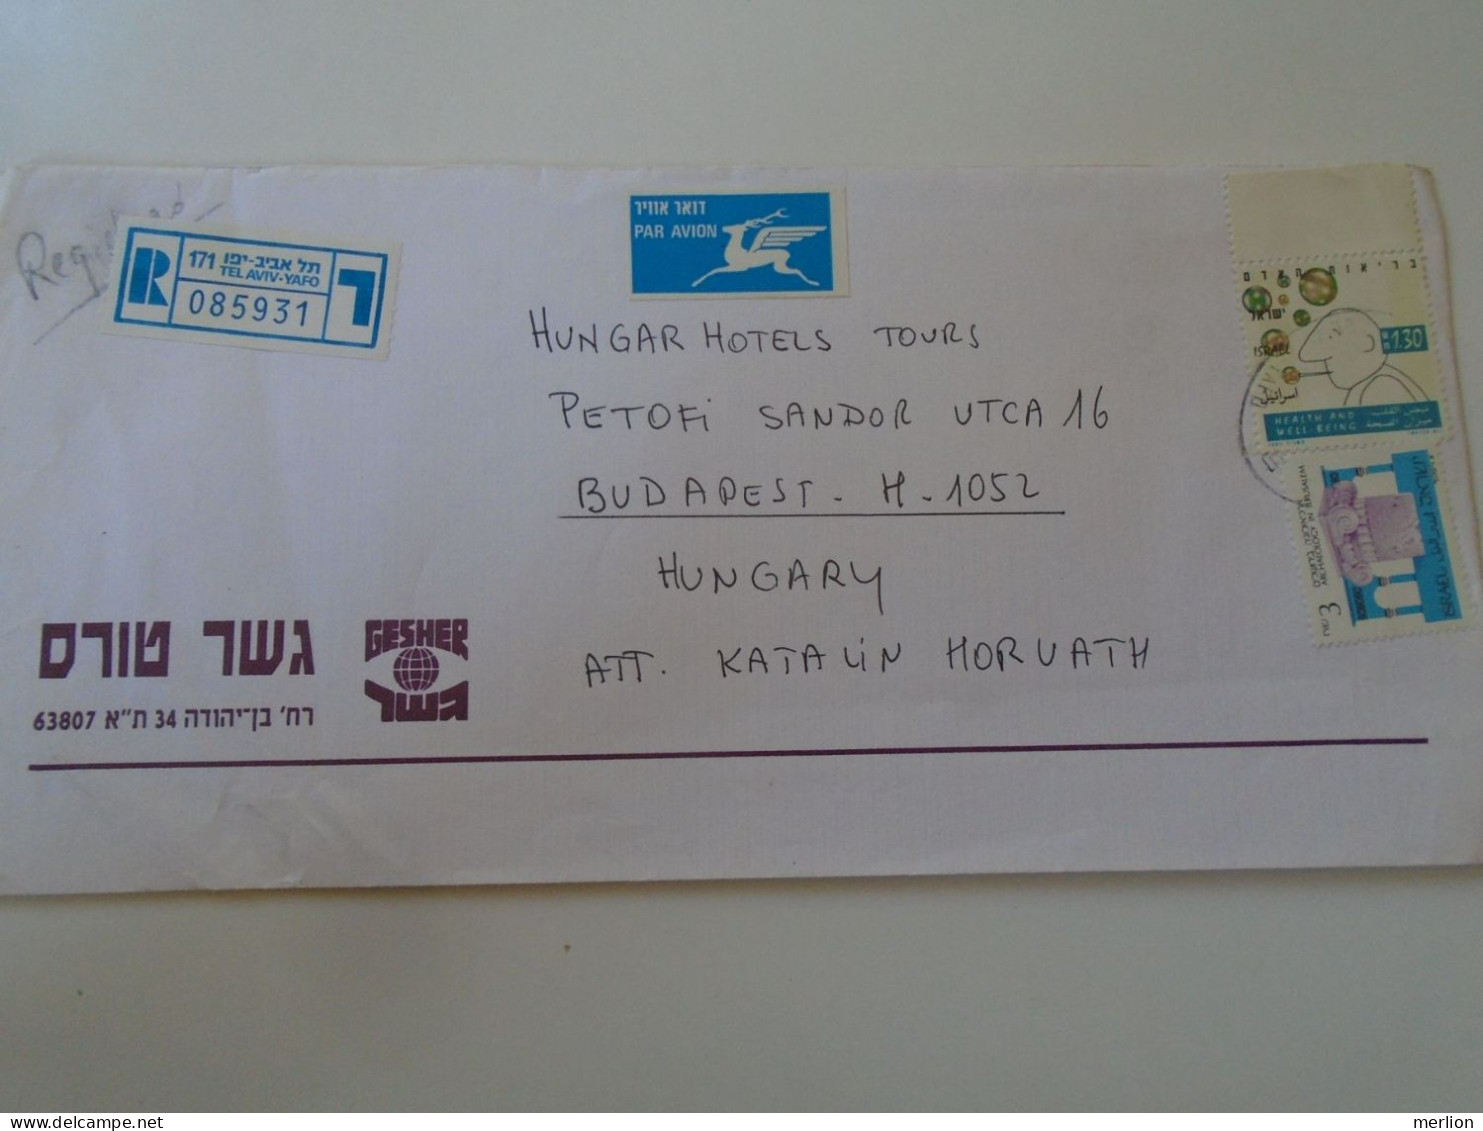 D198290  Israel  Registered   Airmail  Cover   Ca 1992 - Tel Aviv -Yafo    Sent To Hungary - Covers & Documents